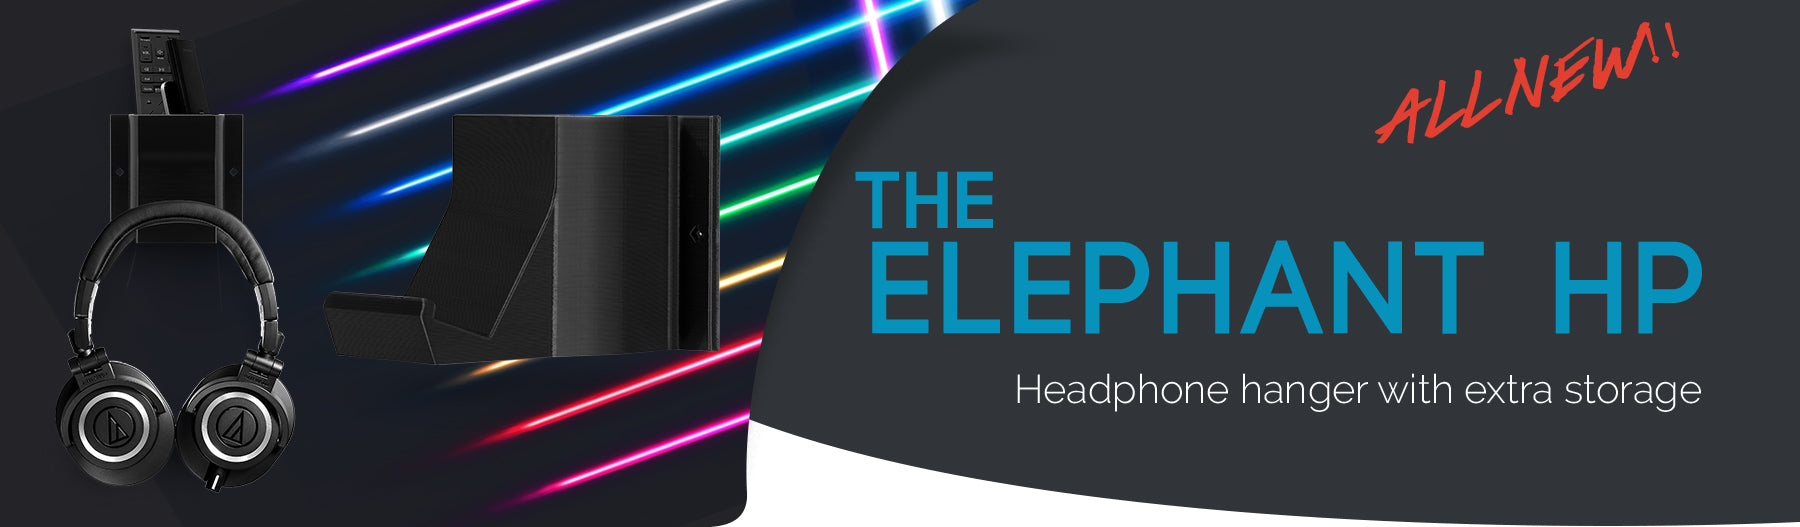 NEW - The Elephant HP - A Headphone Hanger with A Little Extra